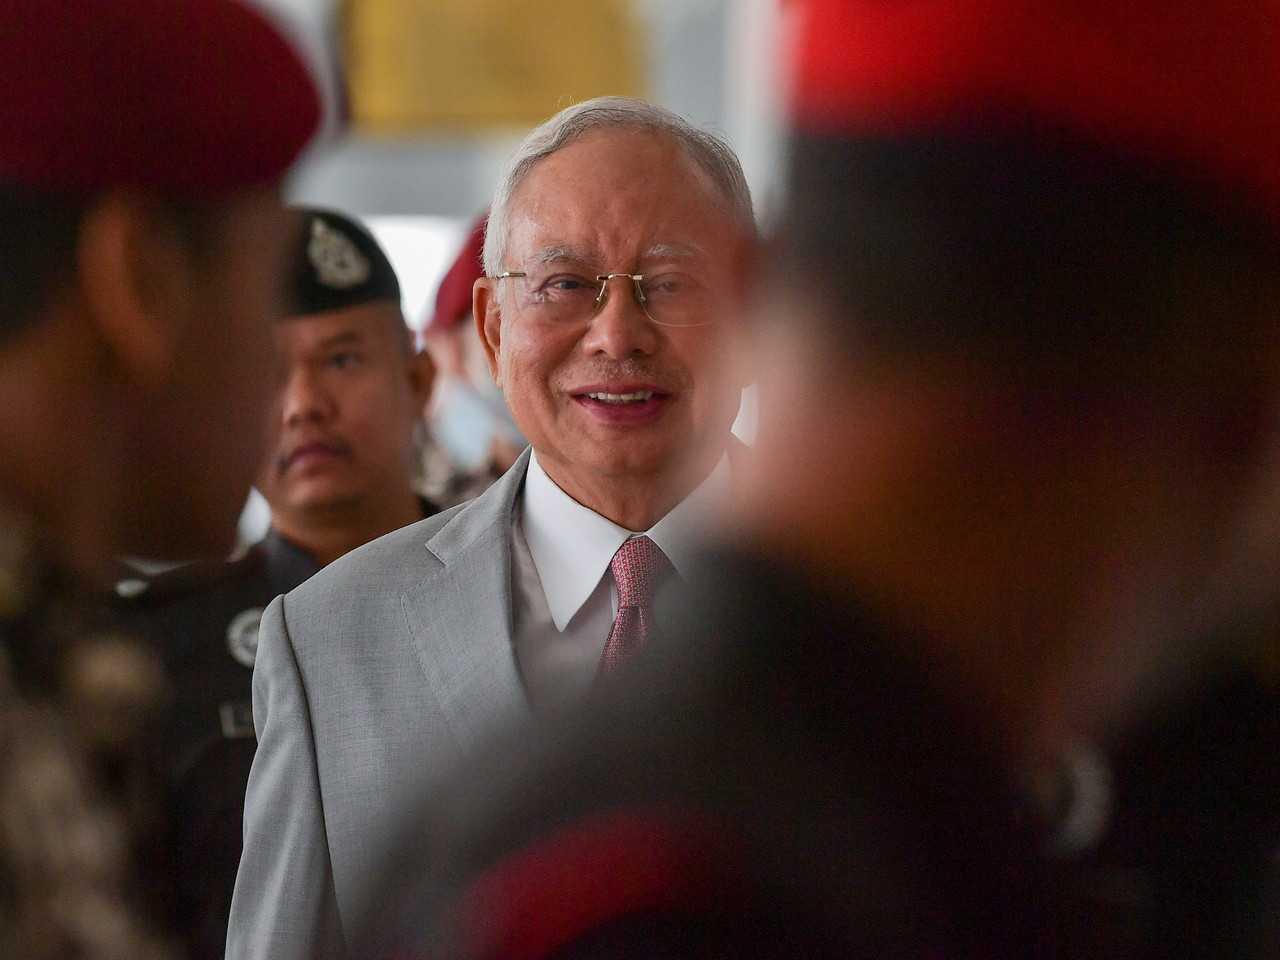 Former prime minister Najib Razak, escorted by security personnel at an appearance in court. Photo: Bernama